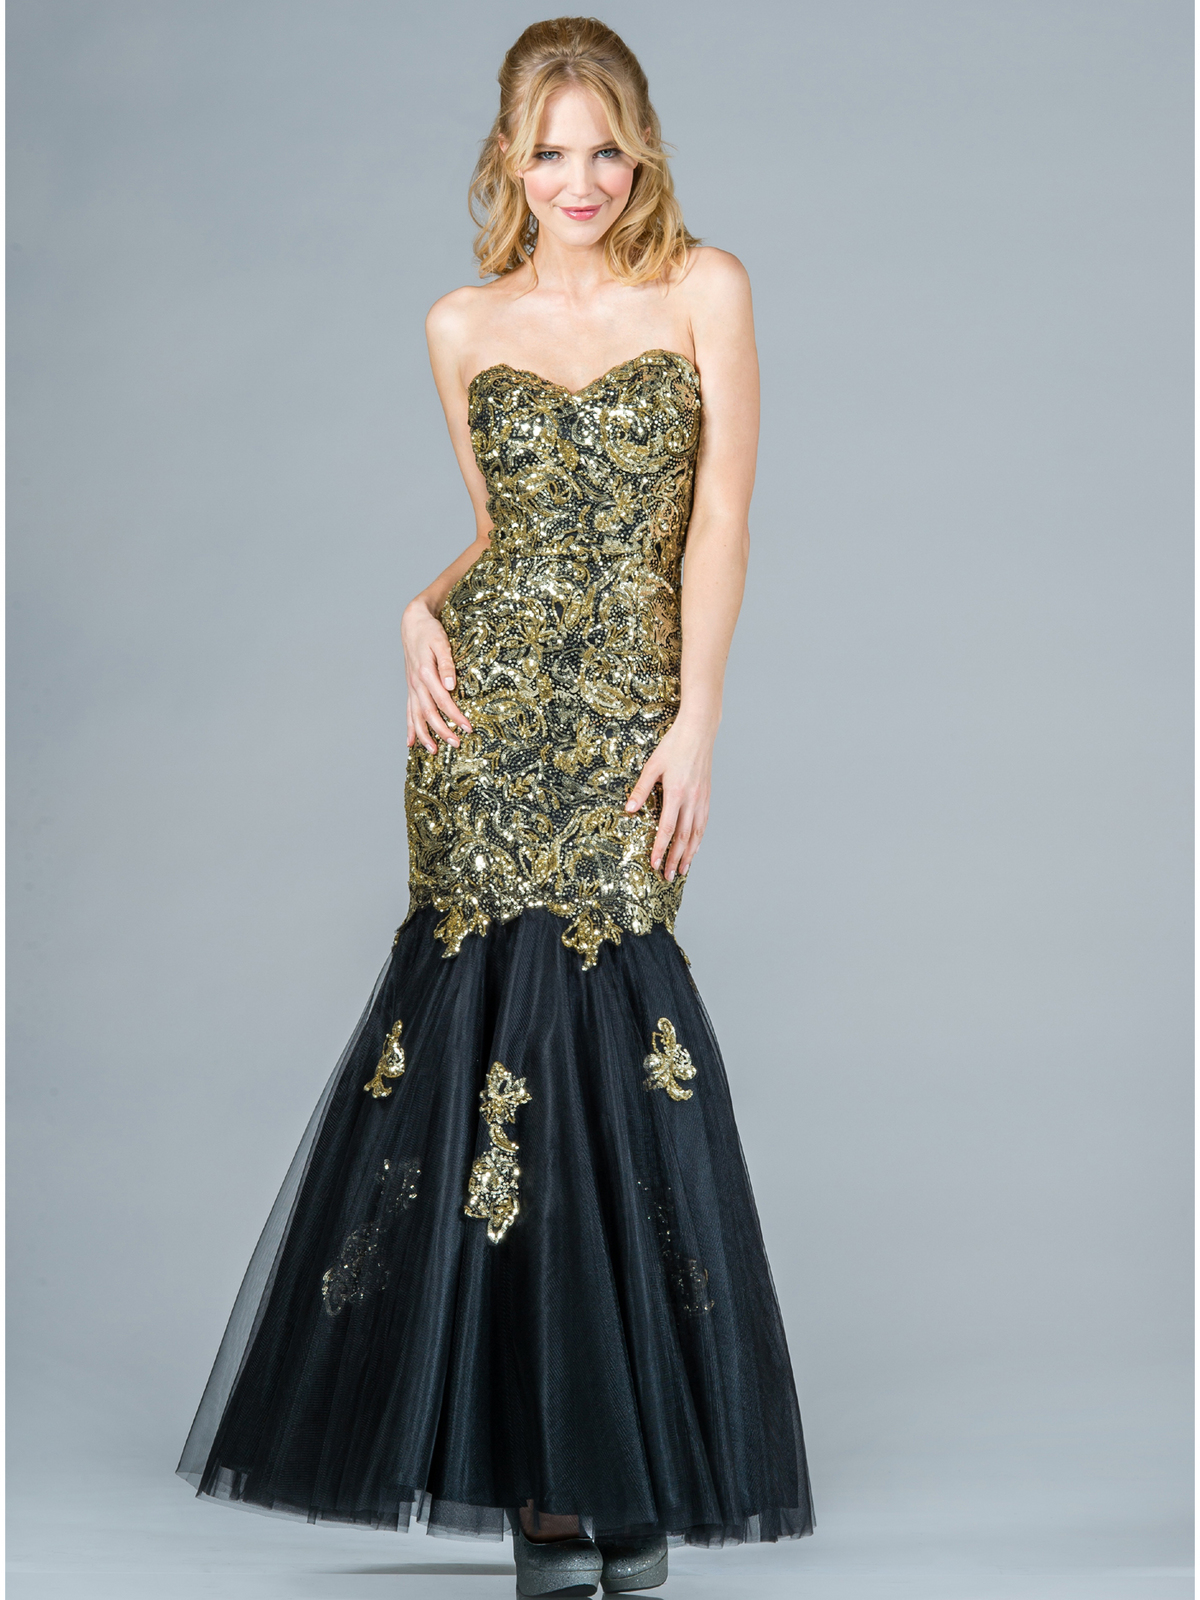 Black And Gold Metallic Dress - Make Your Evening Special